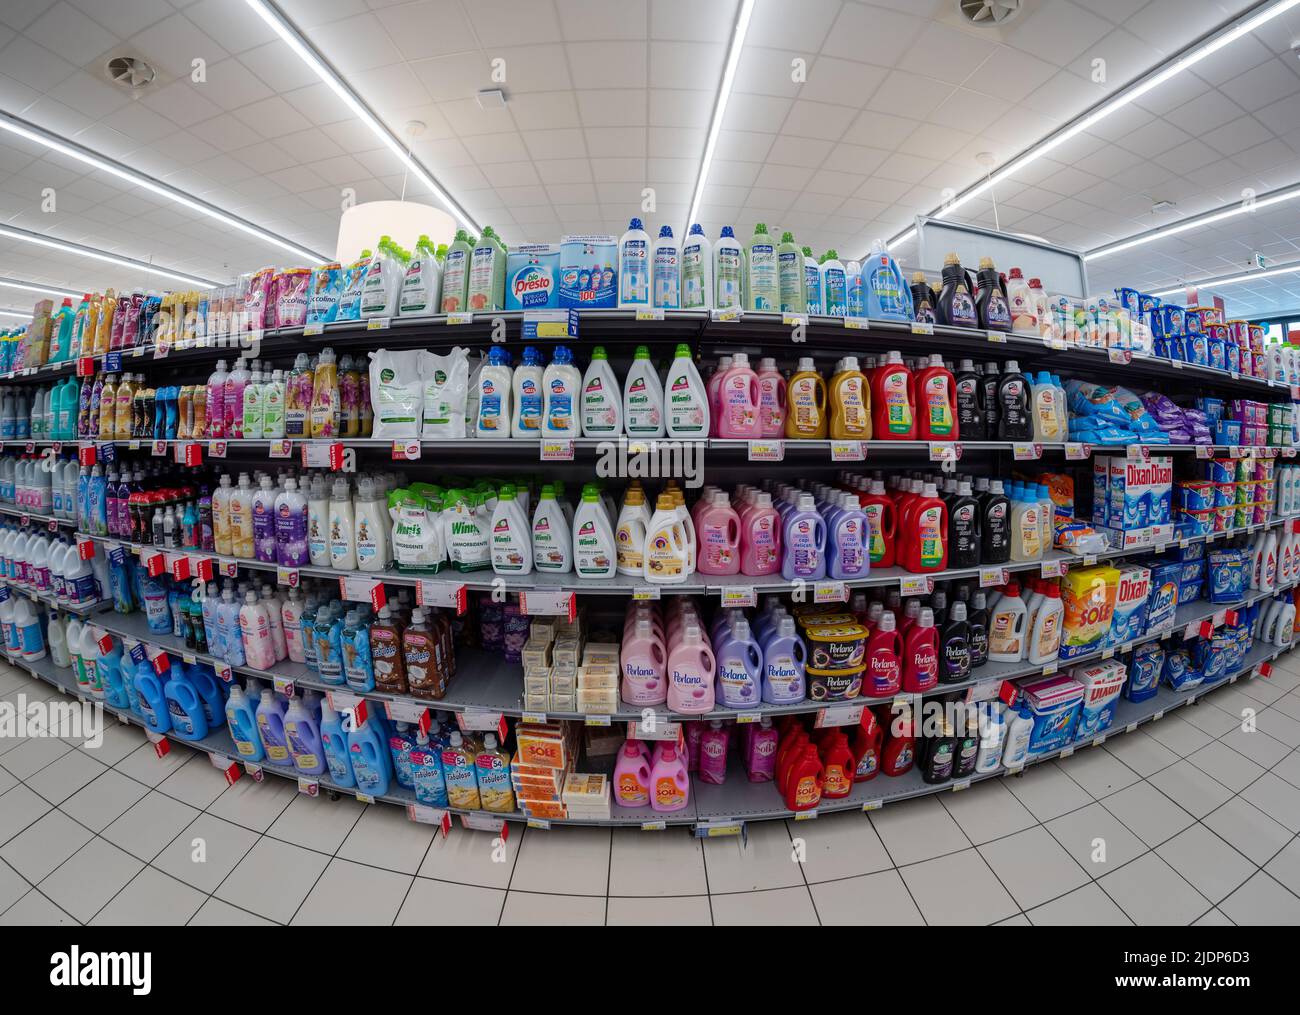 Fossano, Italy - June 07, 2022: Shelves with detergents and products for the washing machine in Italian supermarket. Fish eye vision Stock Photo